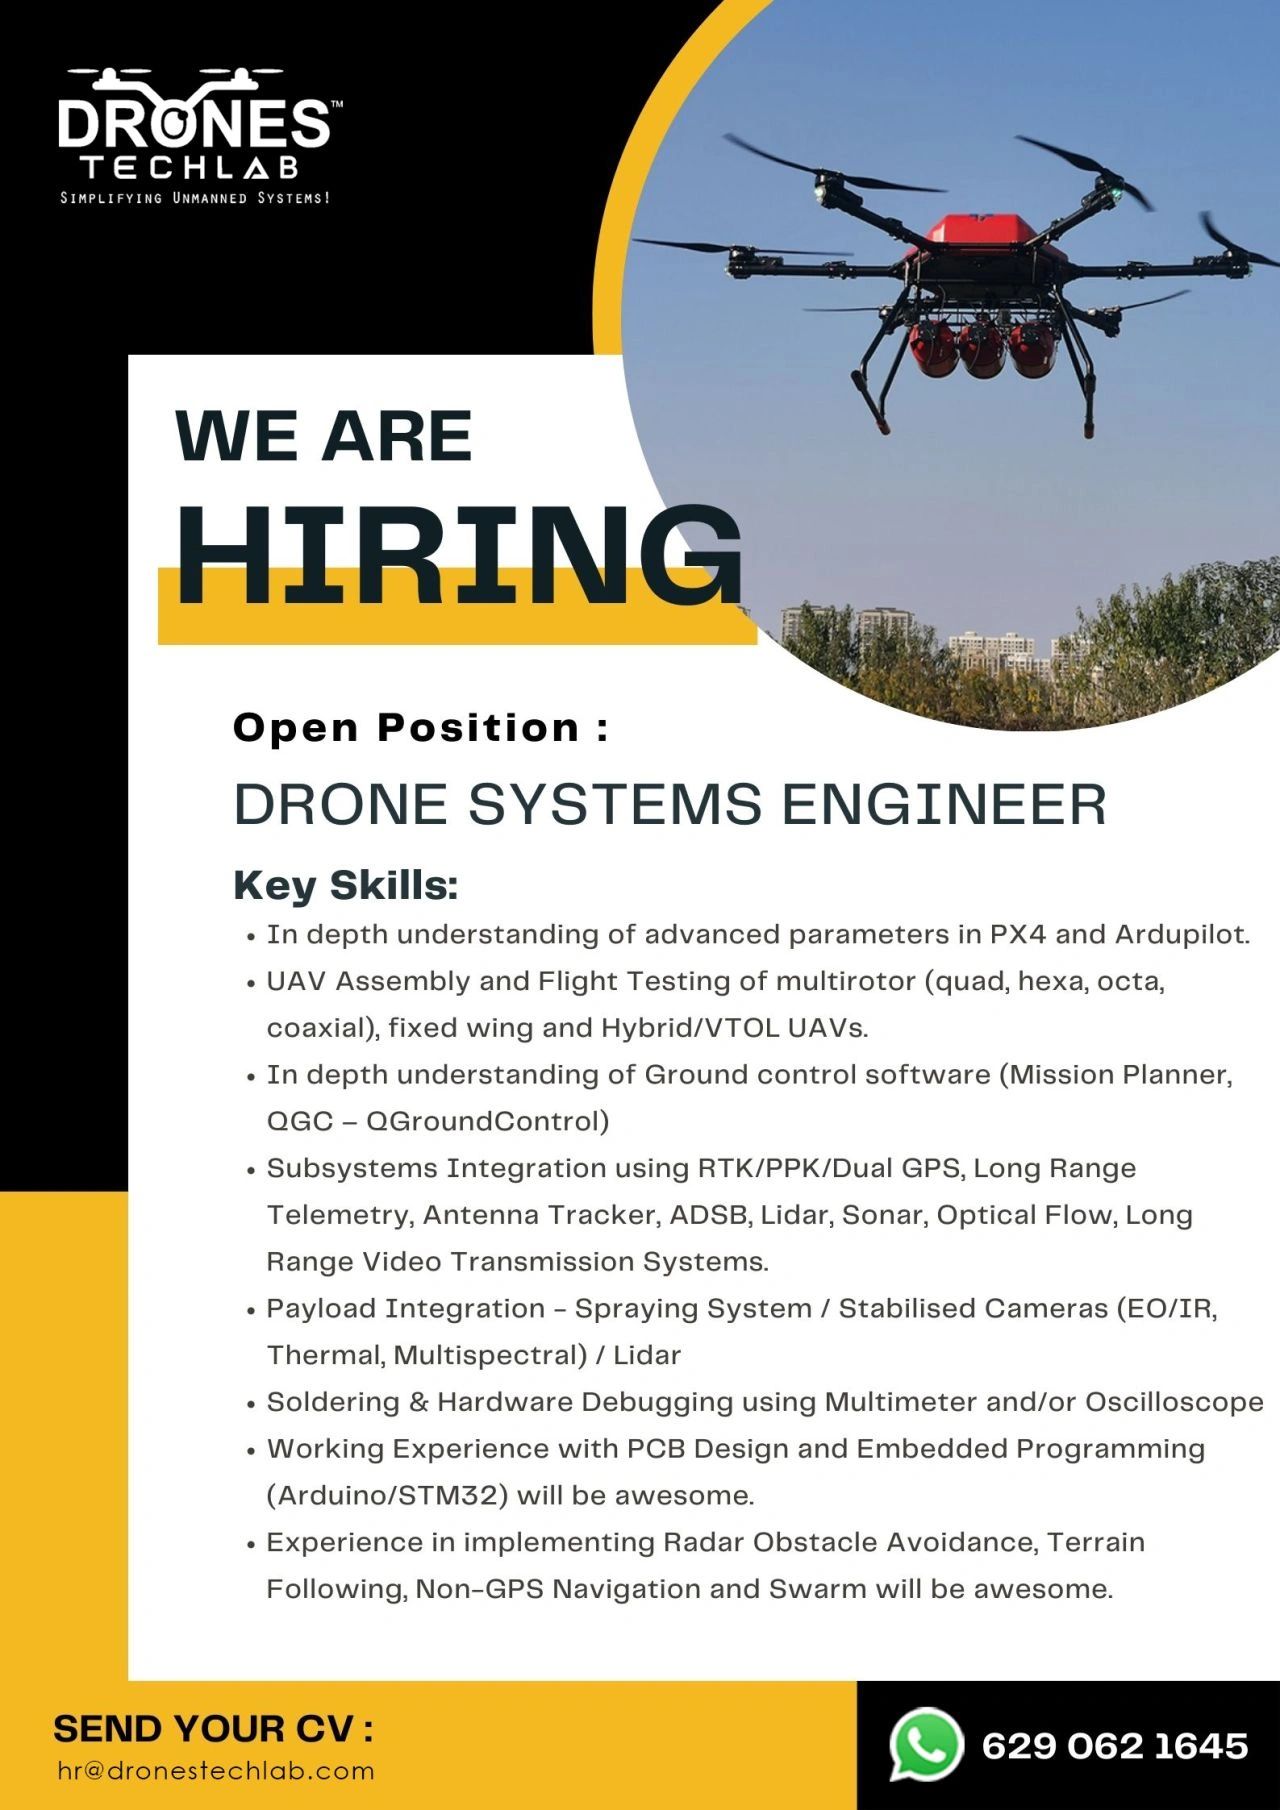 Drones Tech Lab is Hiring - Drone Jobs, Hiring Now!